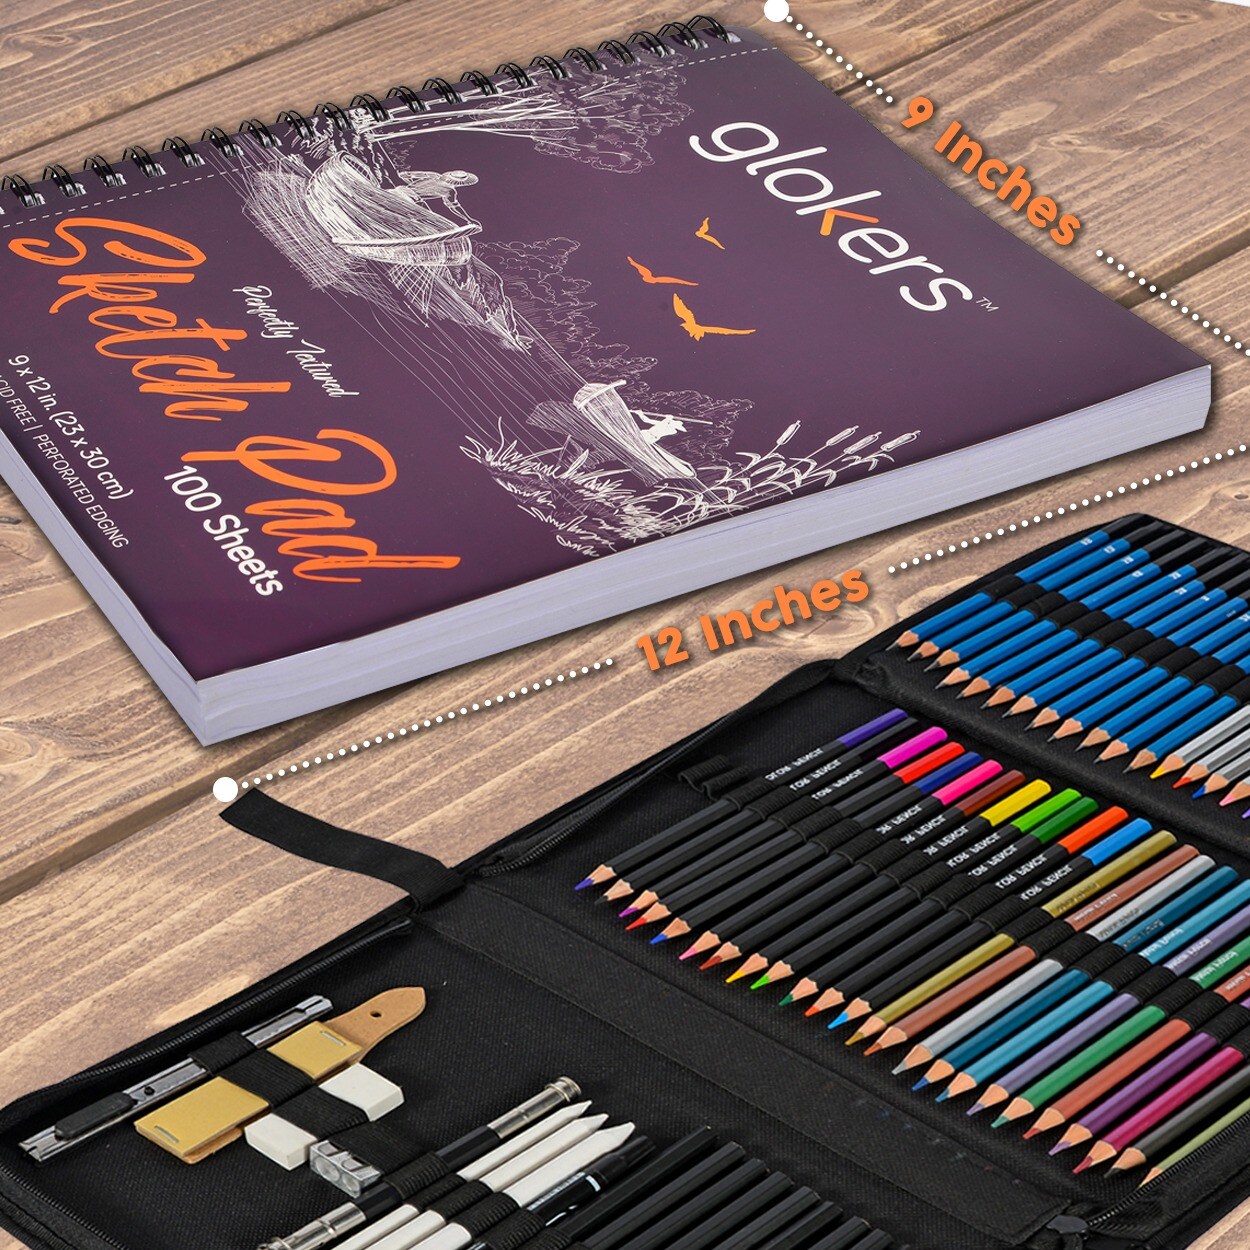 Drawing Pencils Art Kit - Art Supplies for Adults and Kids - with Sketch Book - 72 Piece Art Set, by Glokers